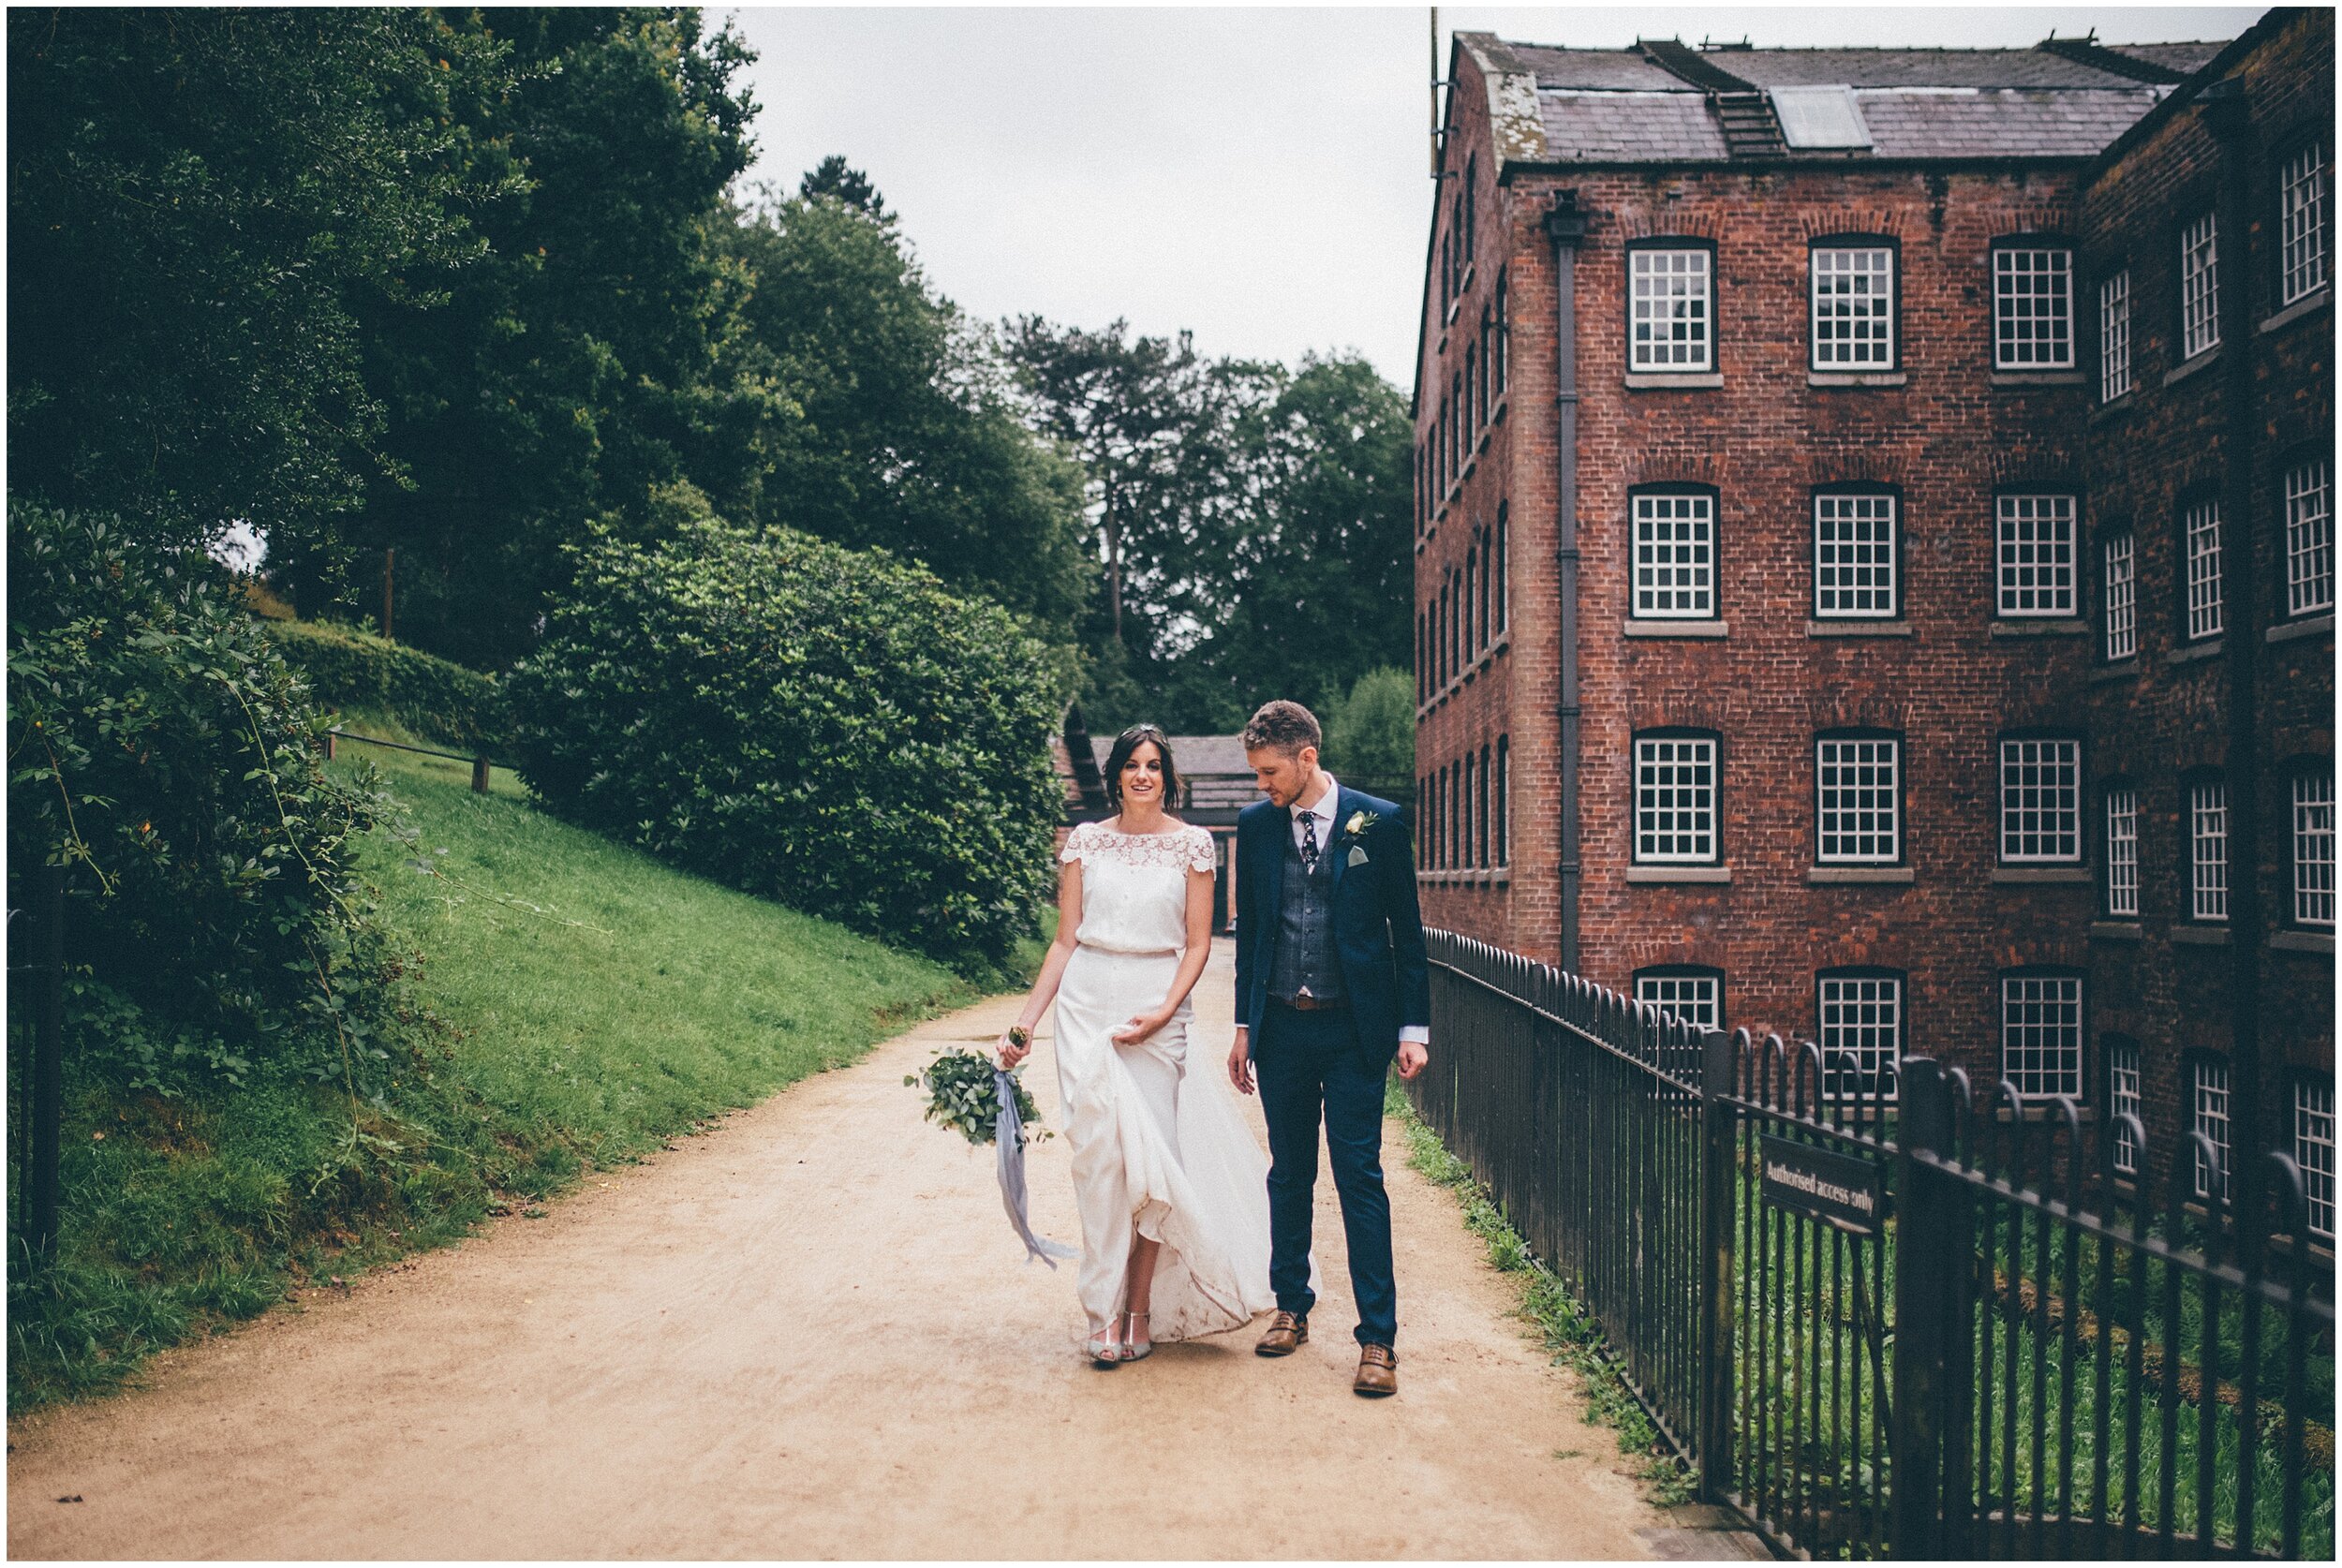 New husband and wife at Quarry Bank Mill wedding in Cheshire near to Manchester.